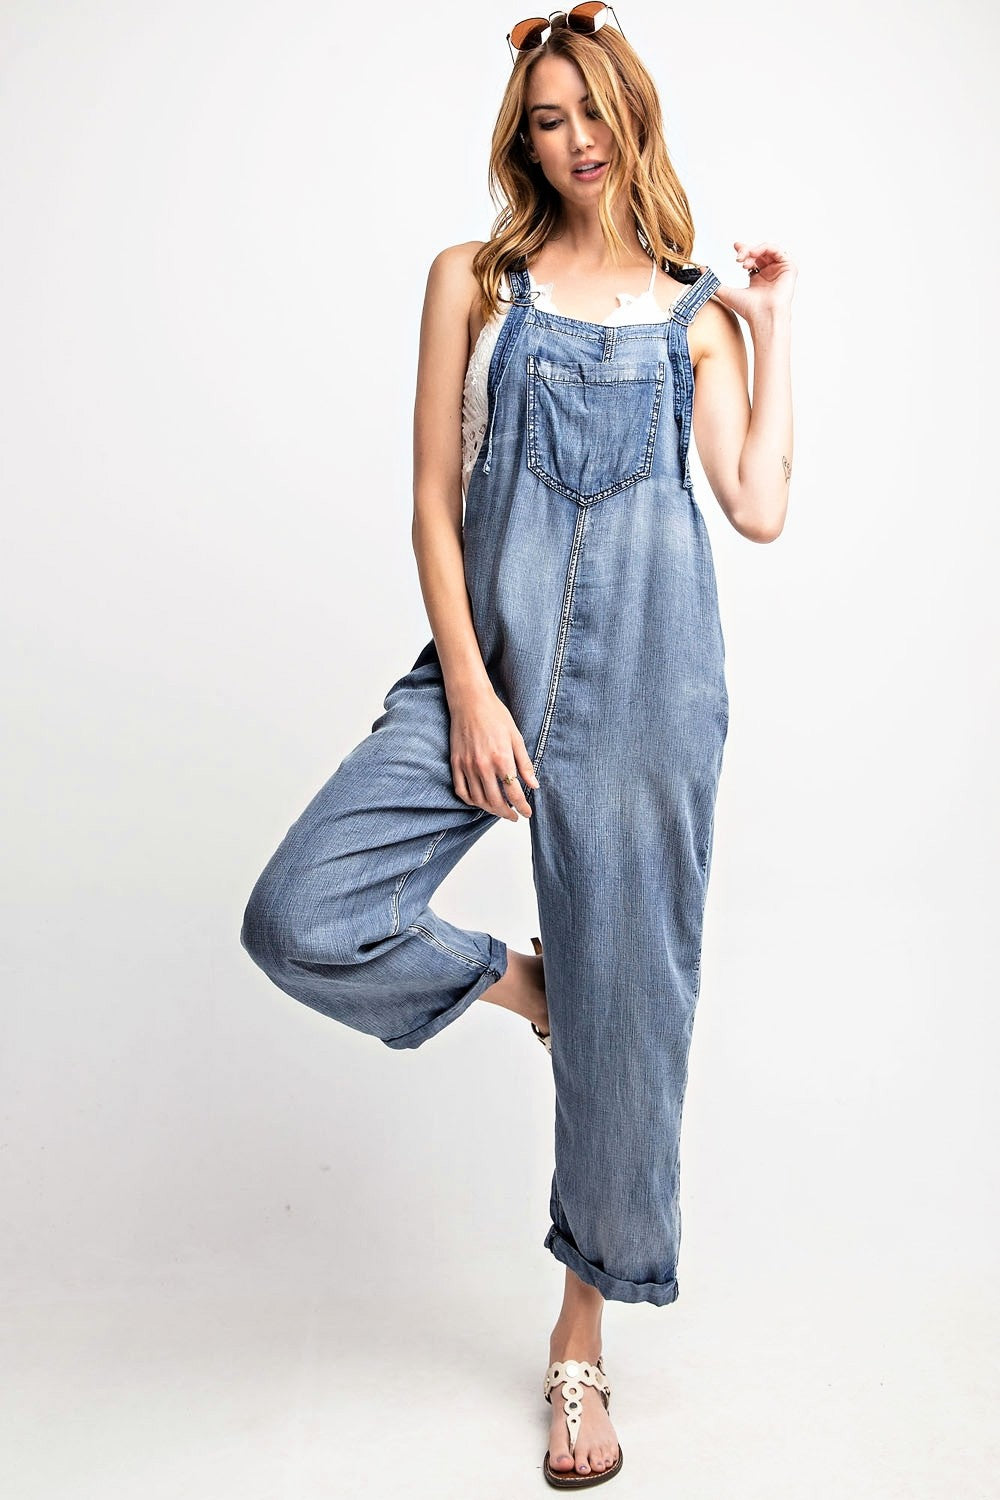 Amazon.com: XBTCLXEBCO Women Denim Dress Overalls Adjustable Strap Overalls  Denim Bib Skirt Distressed Jeans Jumpsuit with Pockets (Grey, s, s) :  Clothing, Shoes & Jewelry